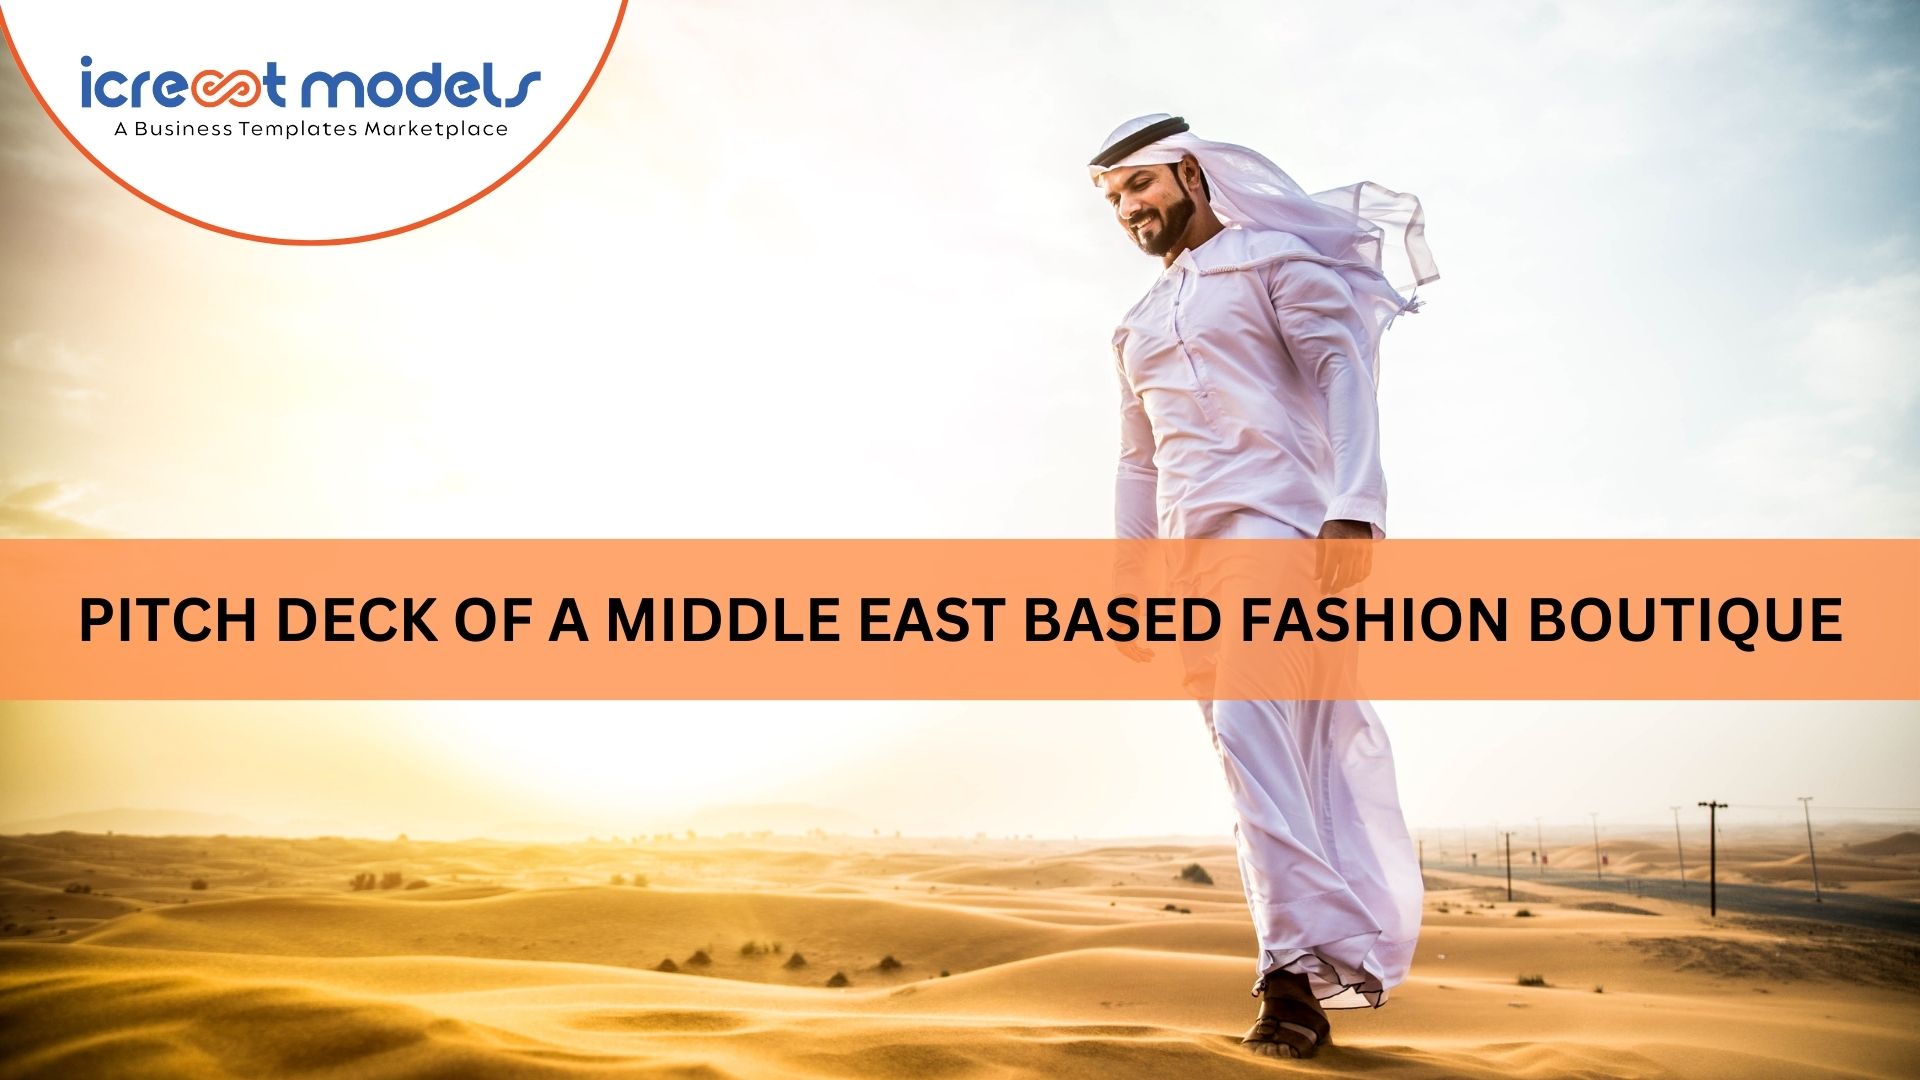 Pitch Deck of a Middle East based Fashion Boutique dealing with Men's wear